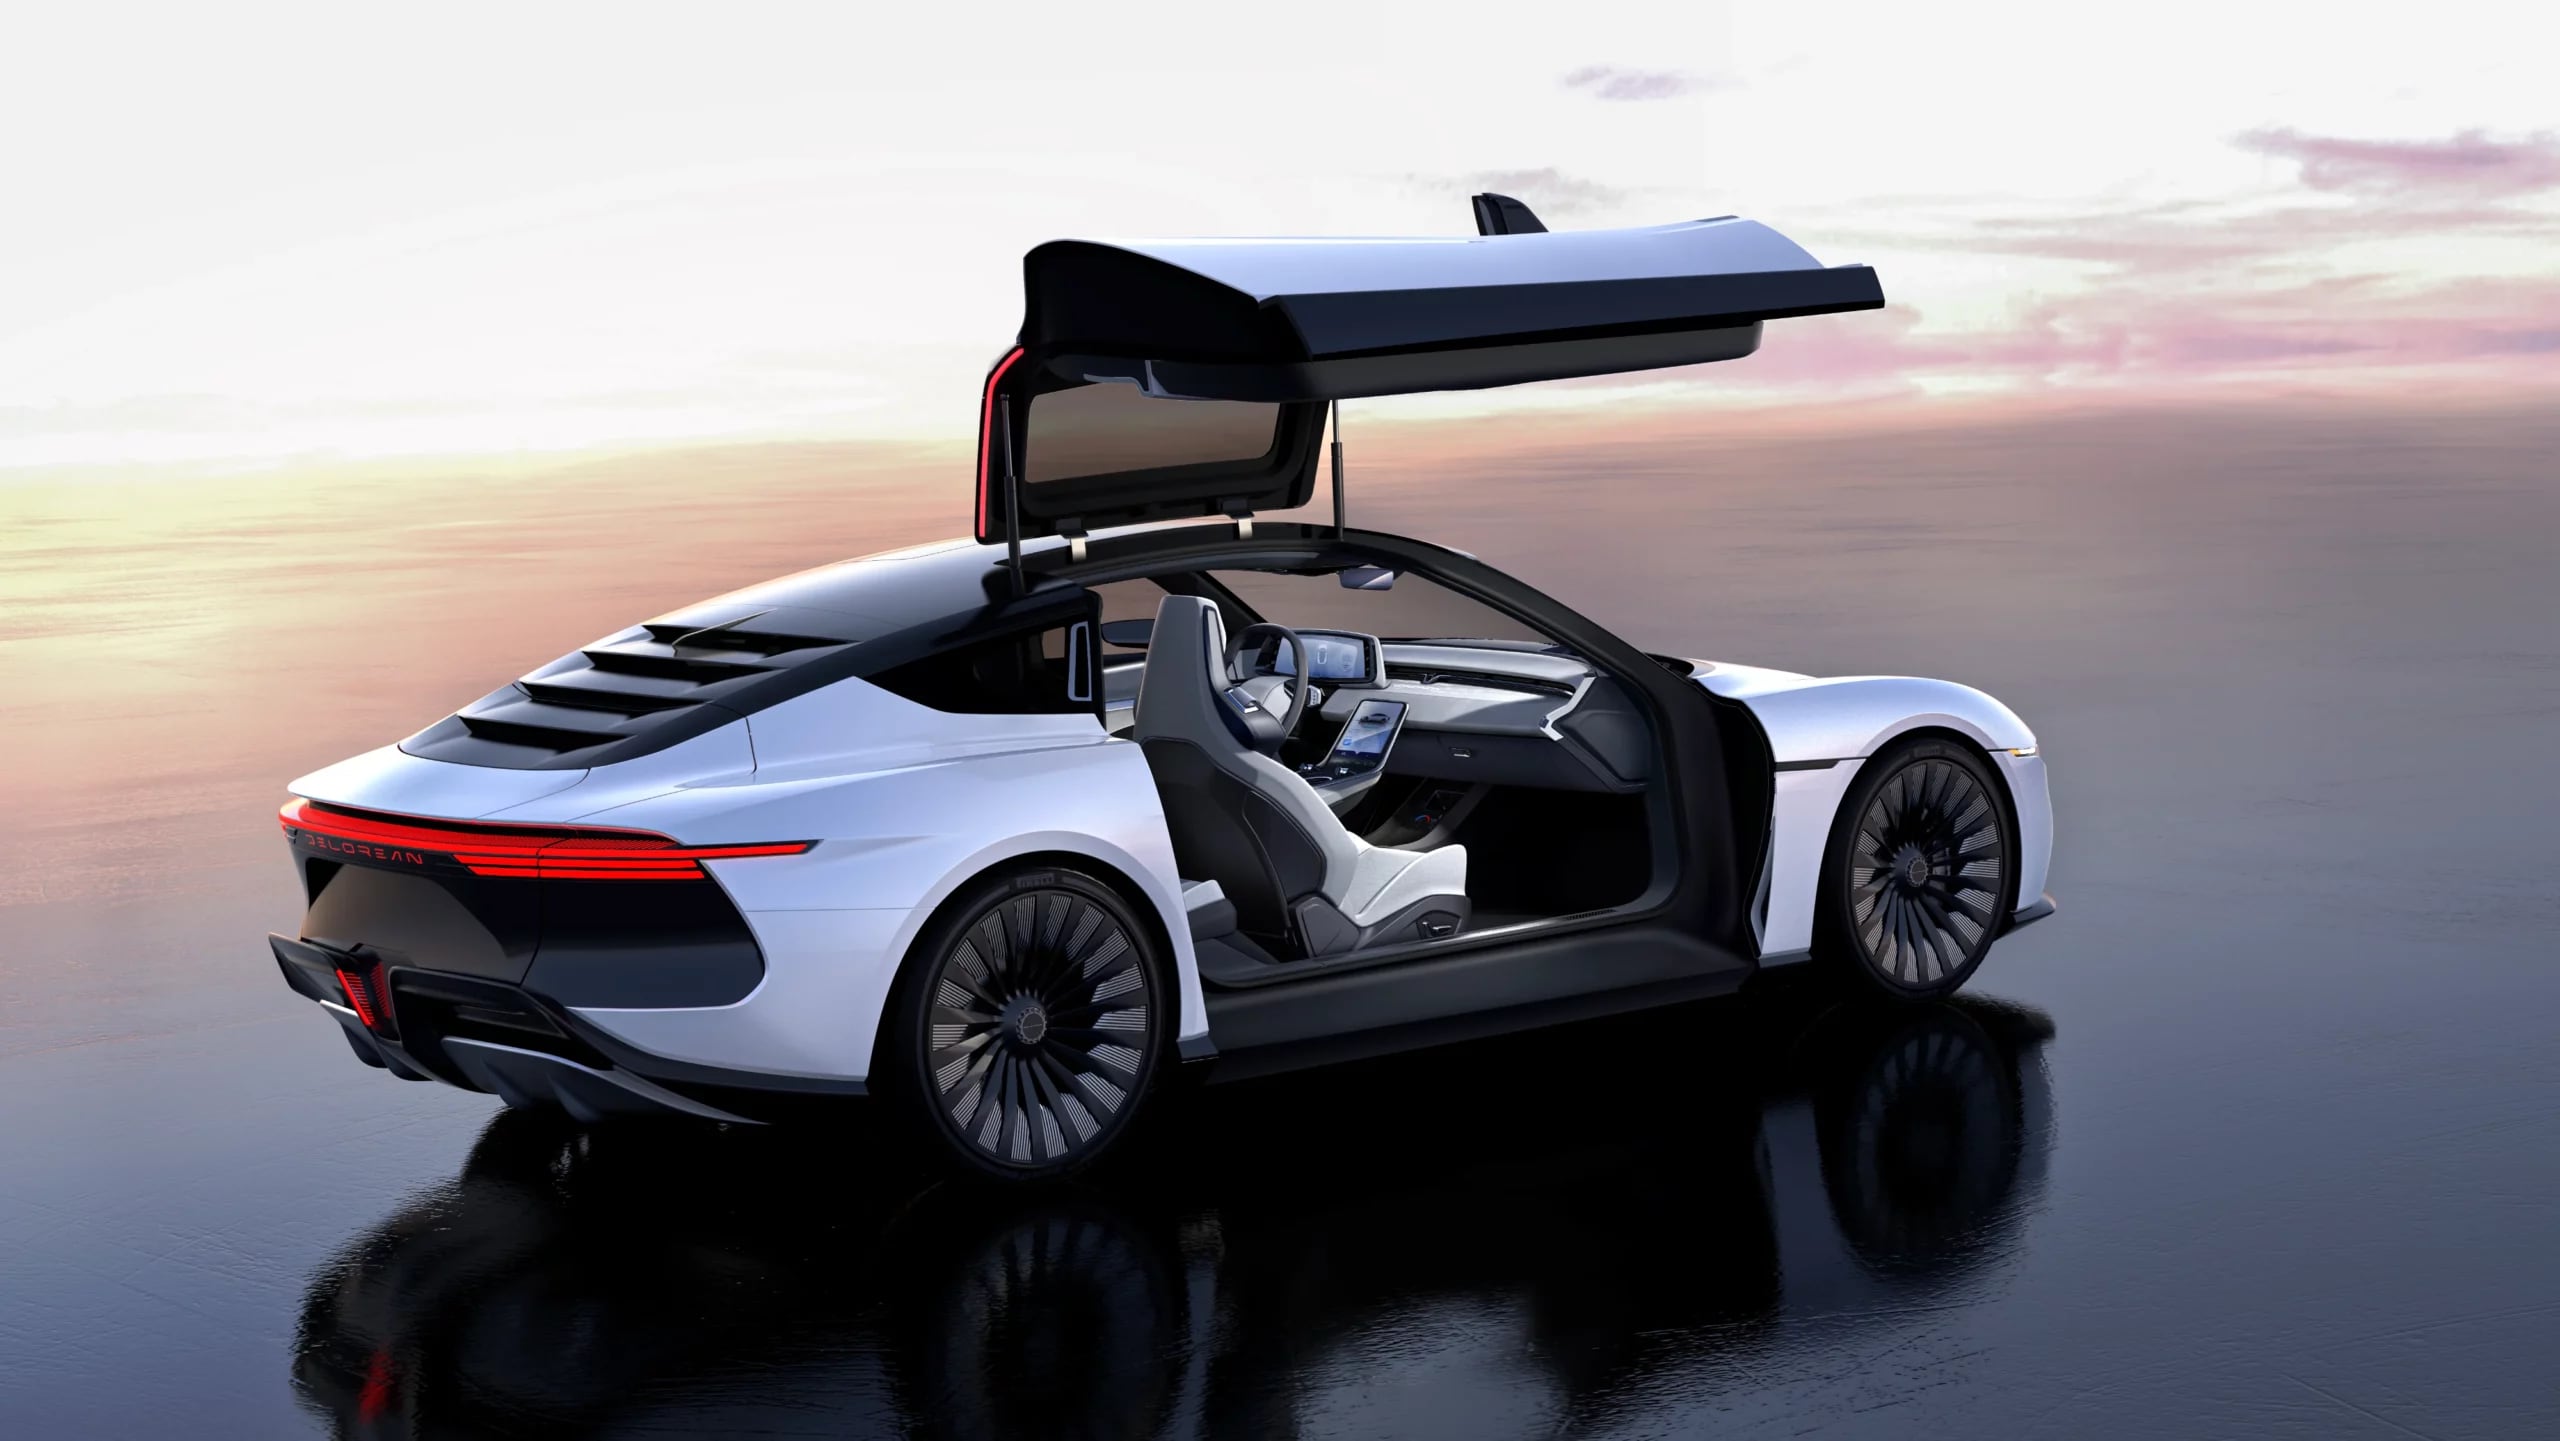 The vehicle maintains the characteristics of the remembered vehicle of Dr. Emmett Brown (Image: delorean.com)